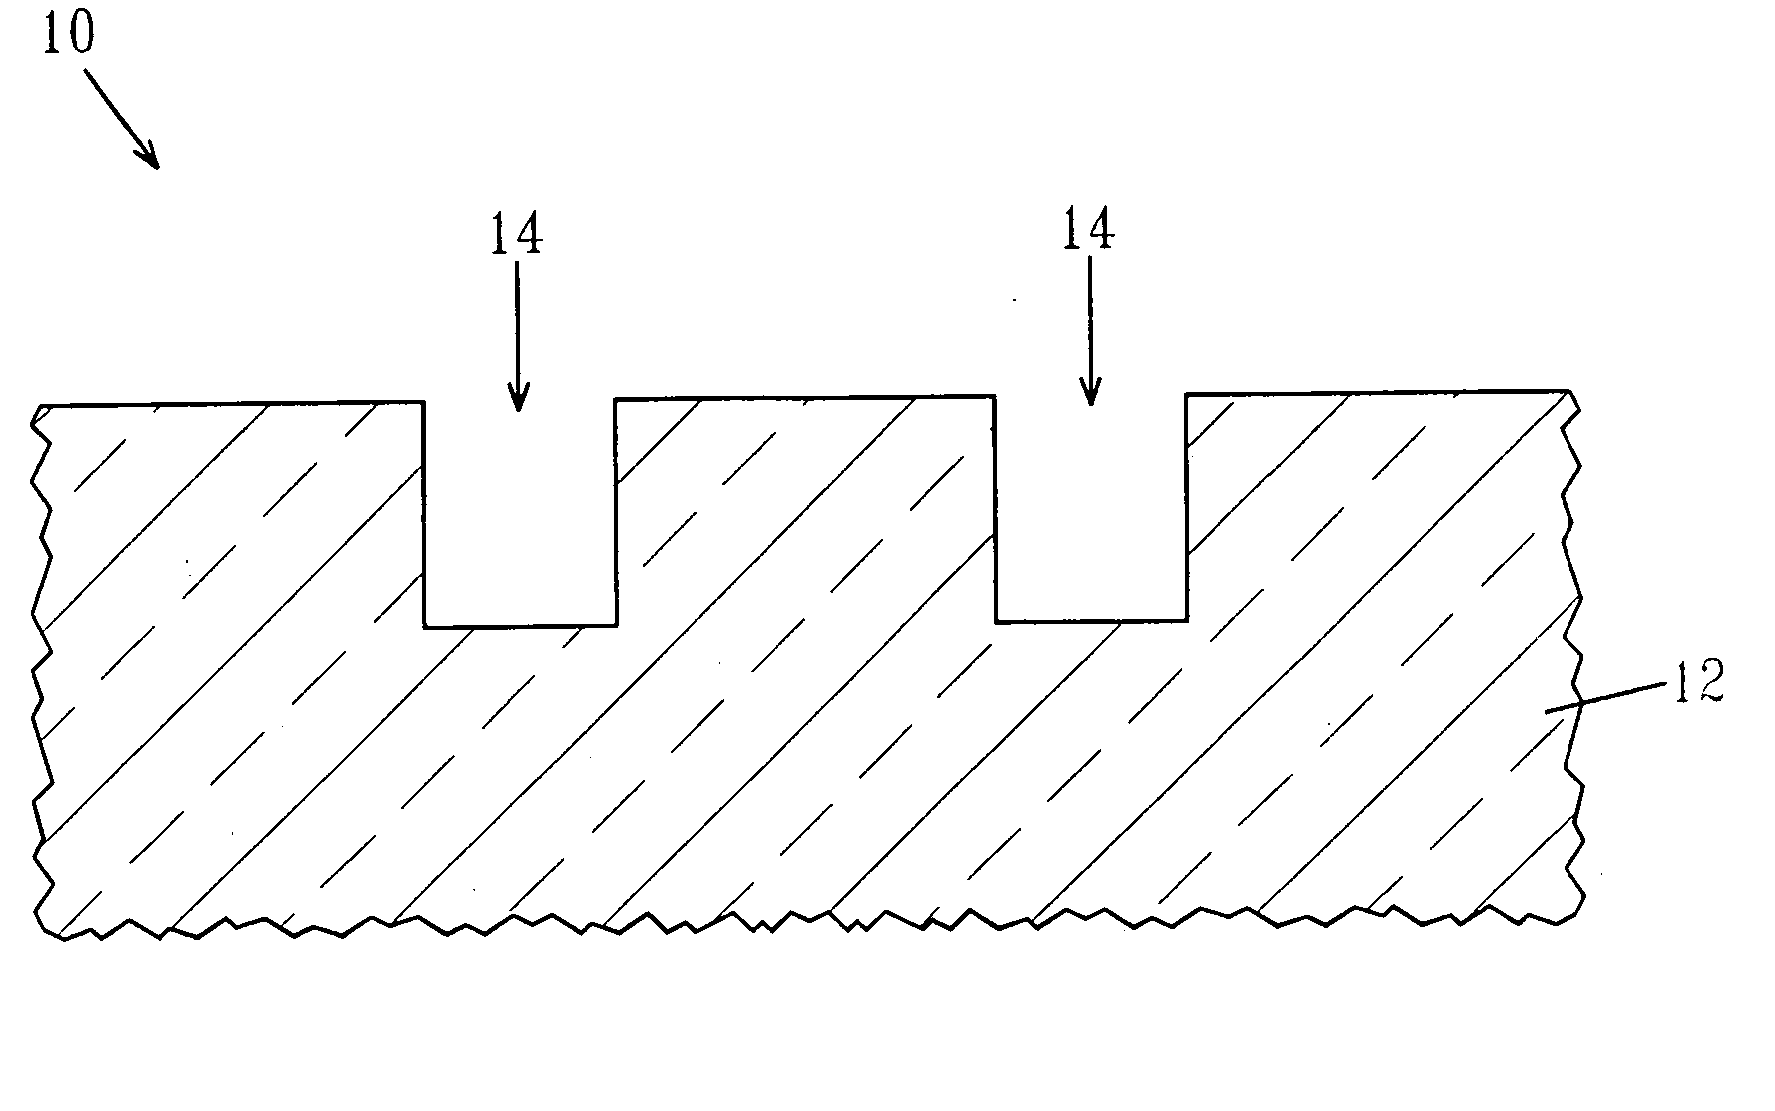 Method of obtaining release-standing micro structures and devices by selective etch removal of protective and sacrificial layer using the same